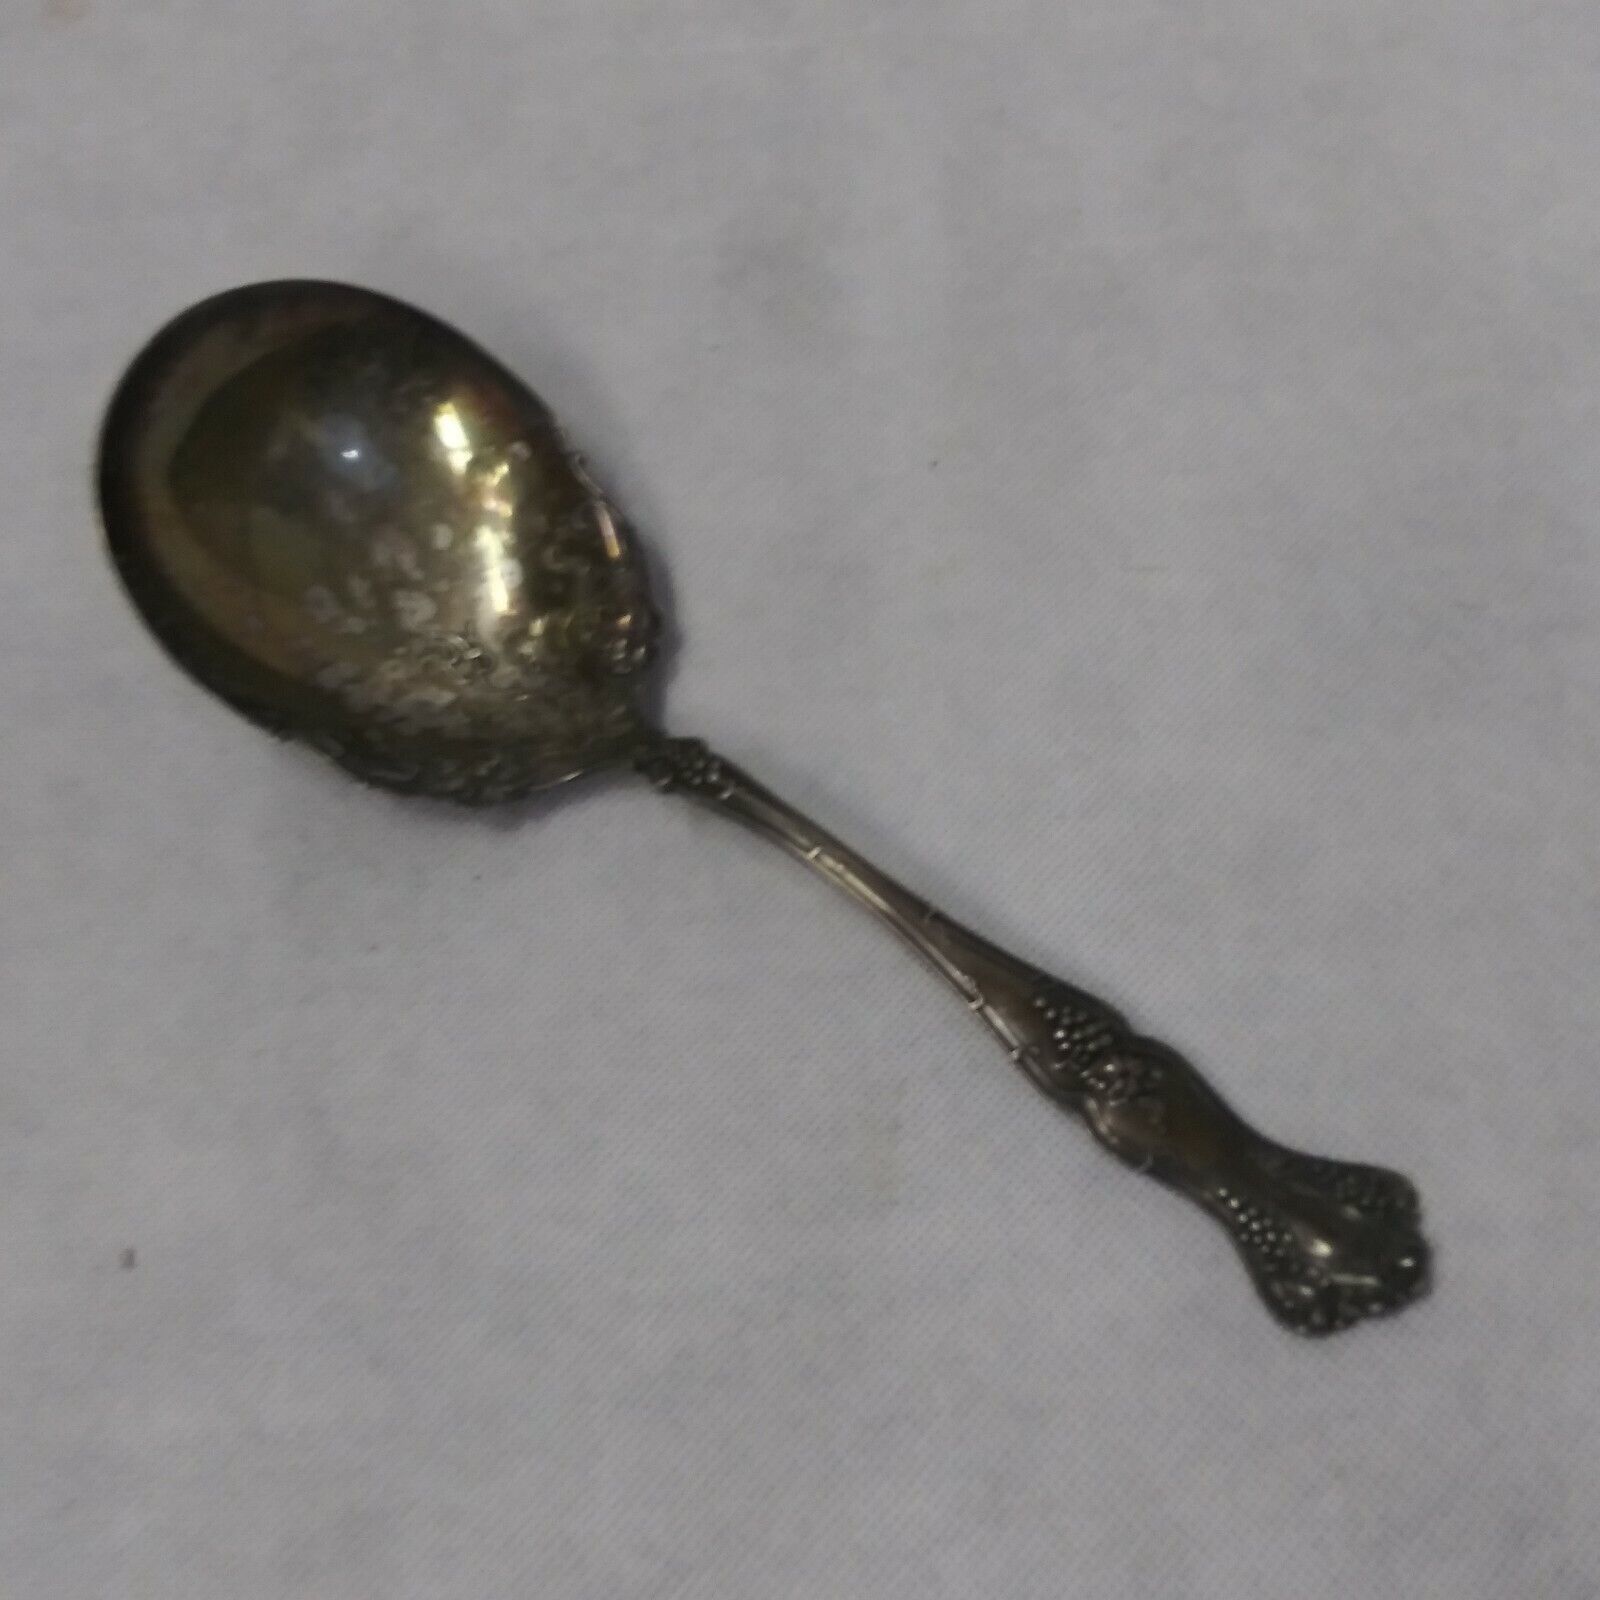 Primary image for Rogers 1847 Vintage Grape Casserole Berry Spoon 1904 Silver Plated Int'l Silver